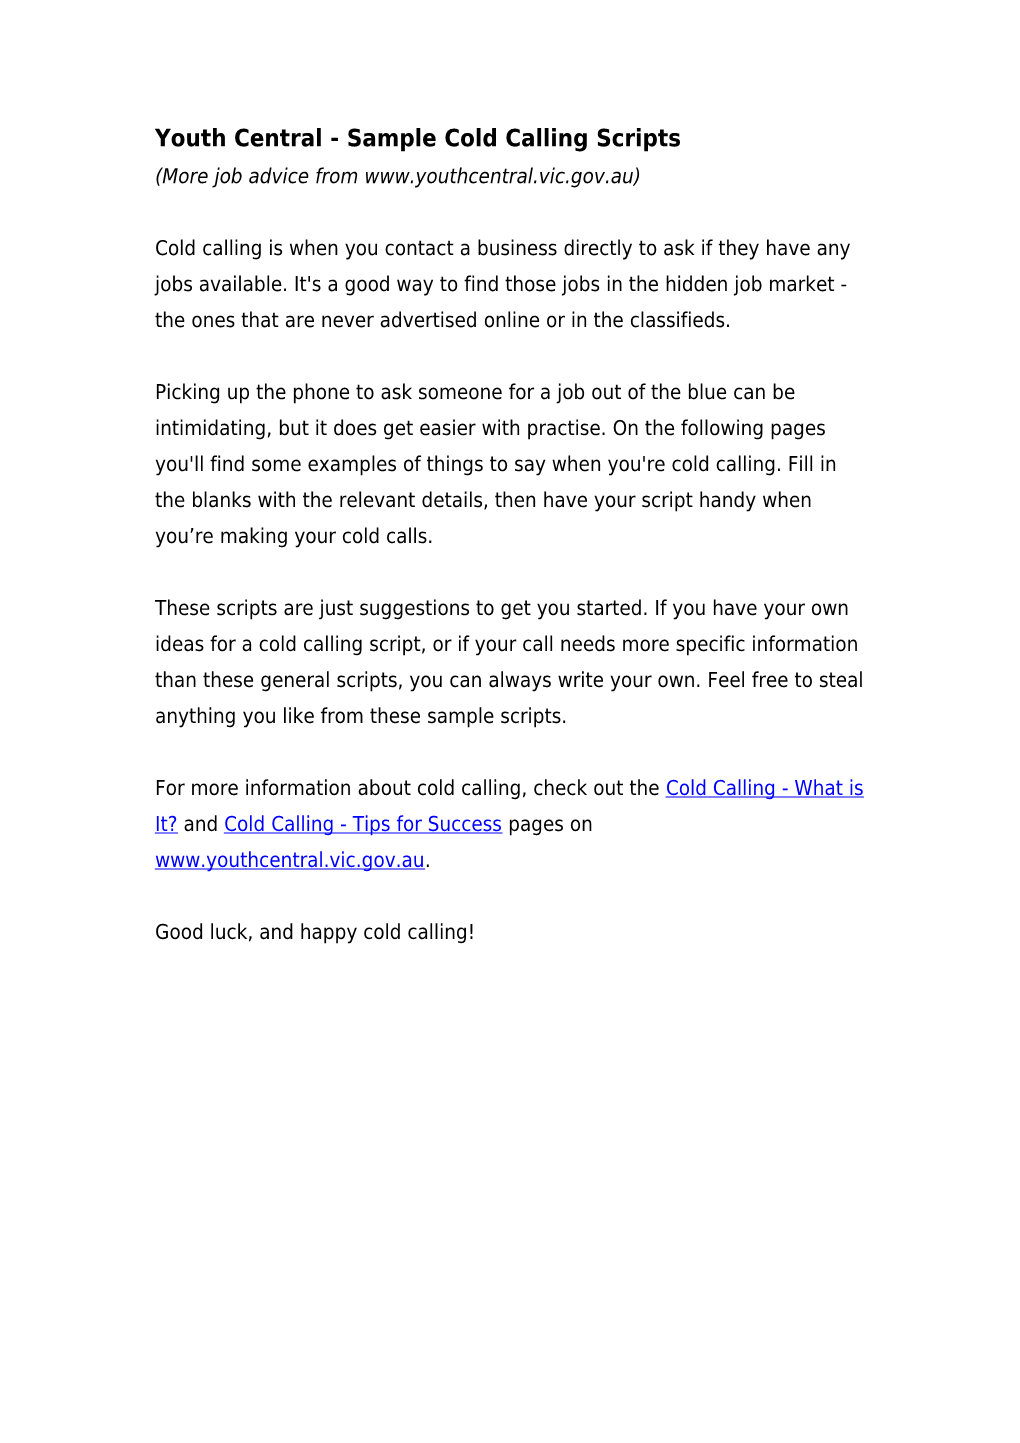 Youth Central - Sample Cold Calling Scripts (More Job Advice From